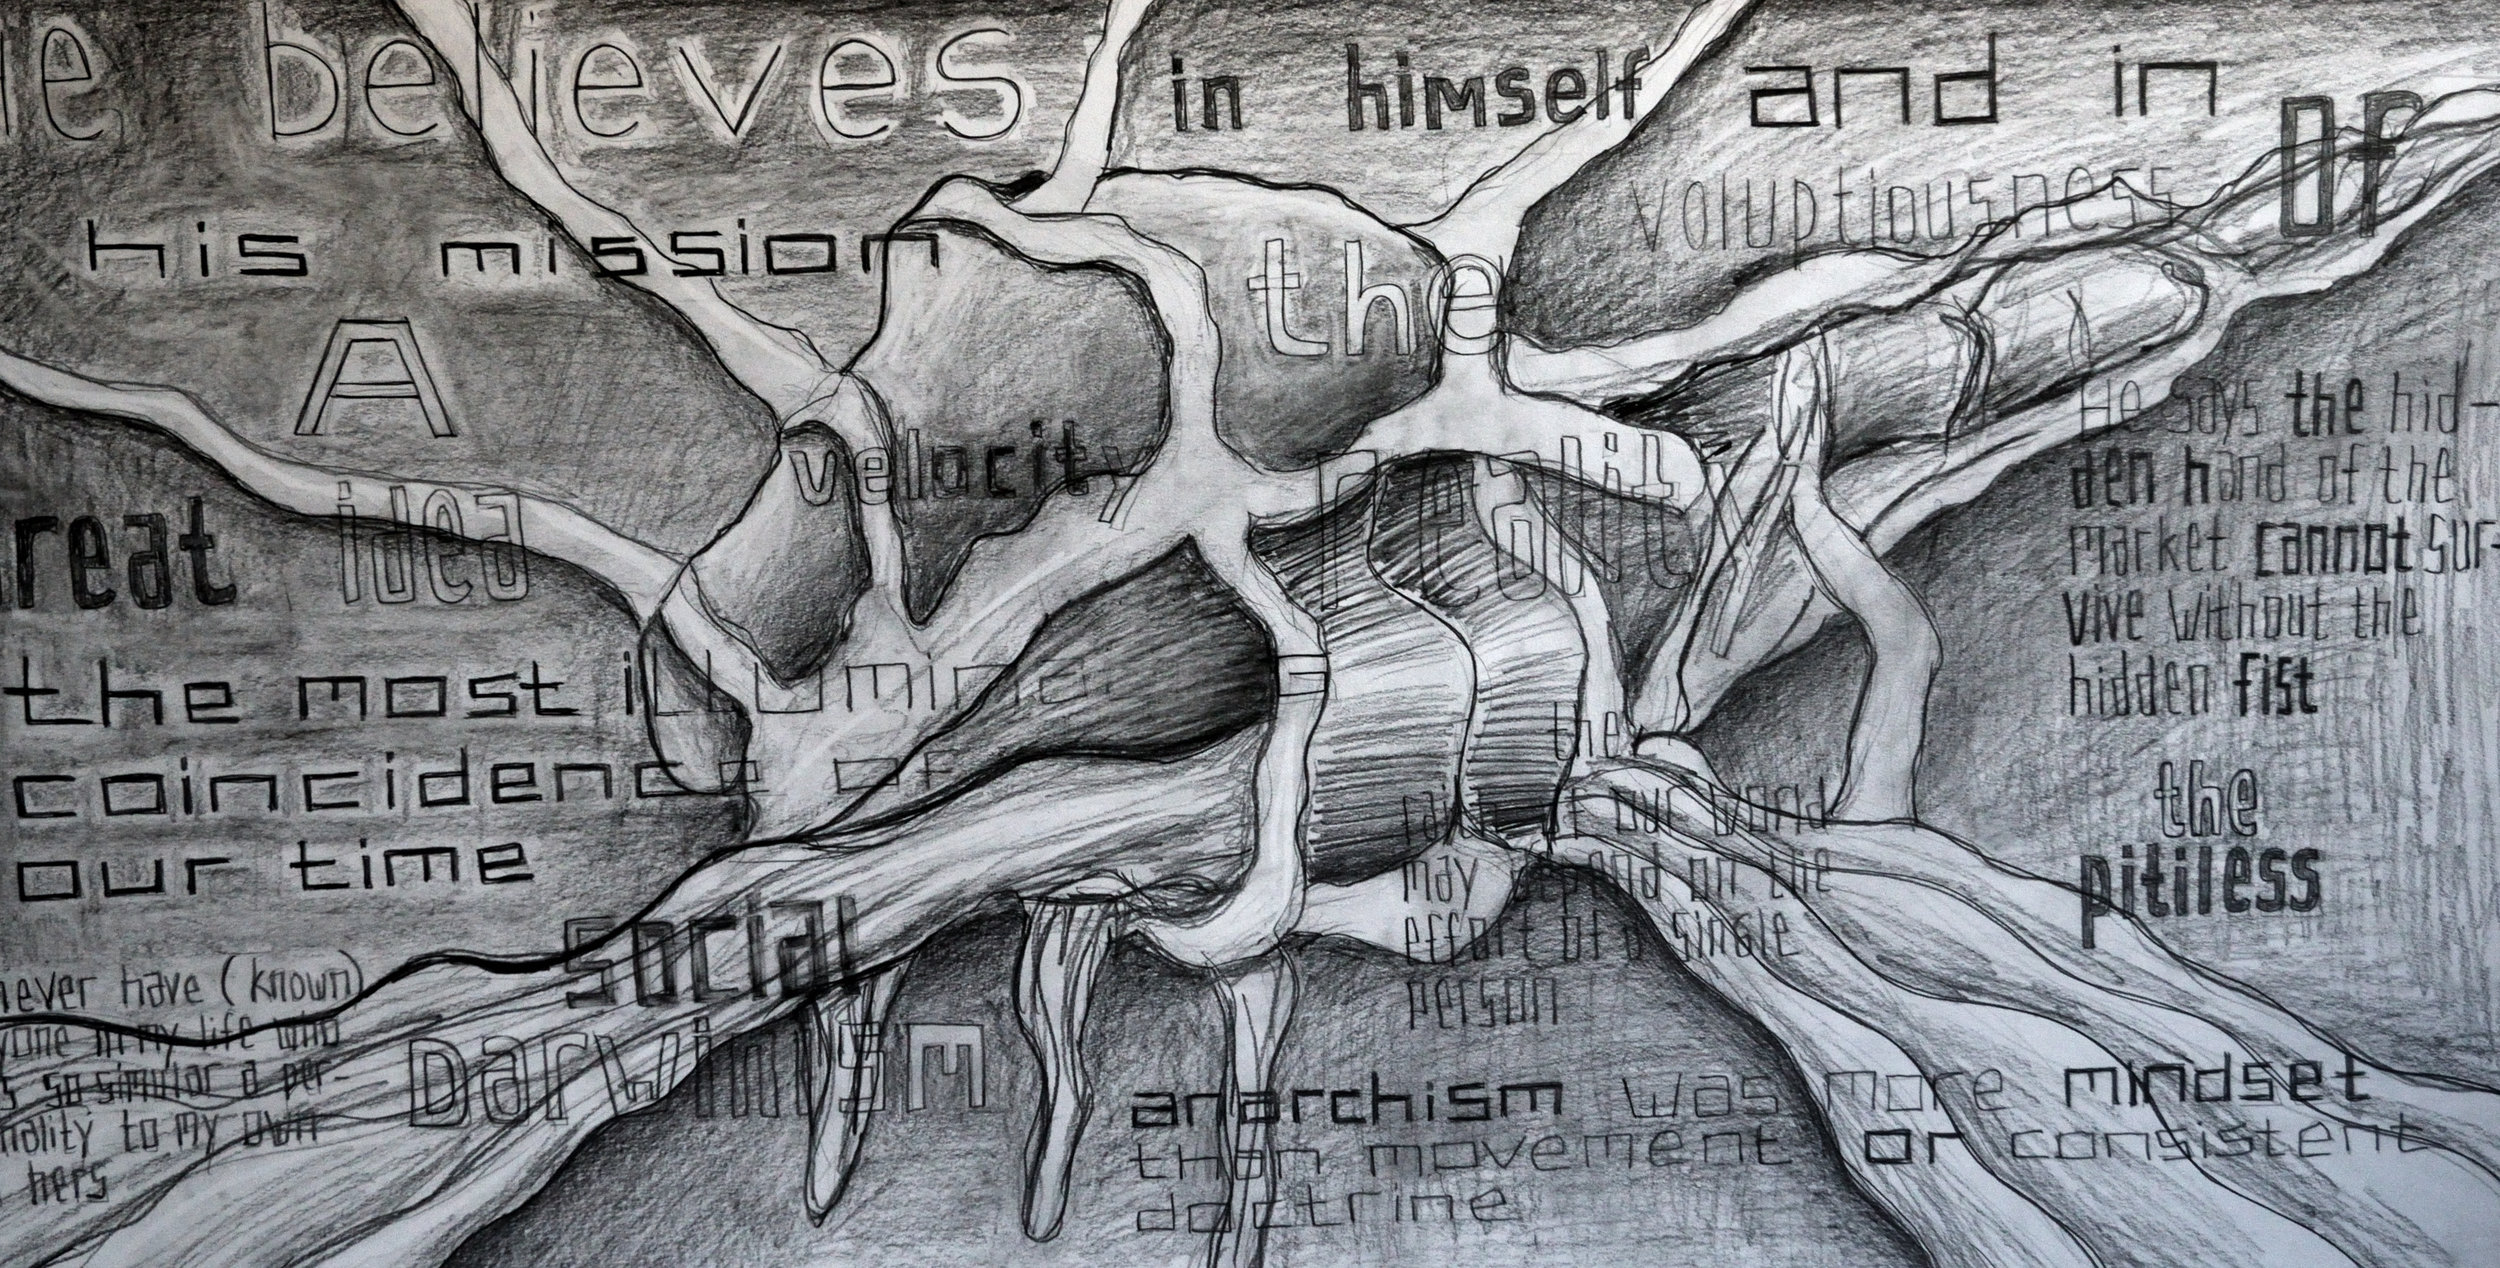 The Most Illuminating Mindset, He Insisted, Cannot Survive Without the Hidden Fist, pencil on paper, 70x140cm